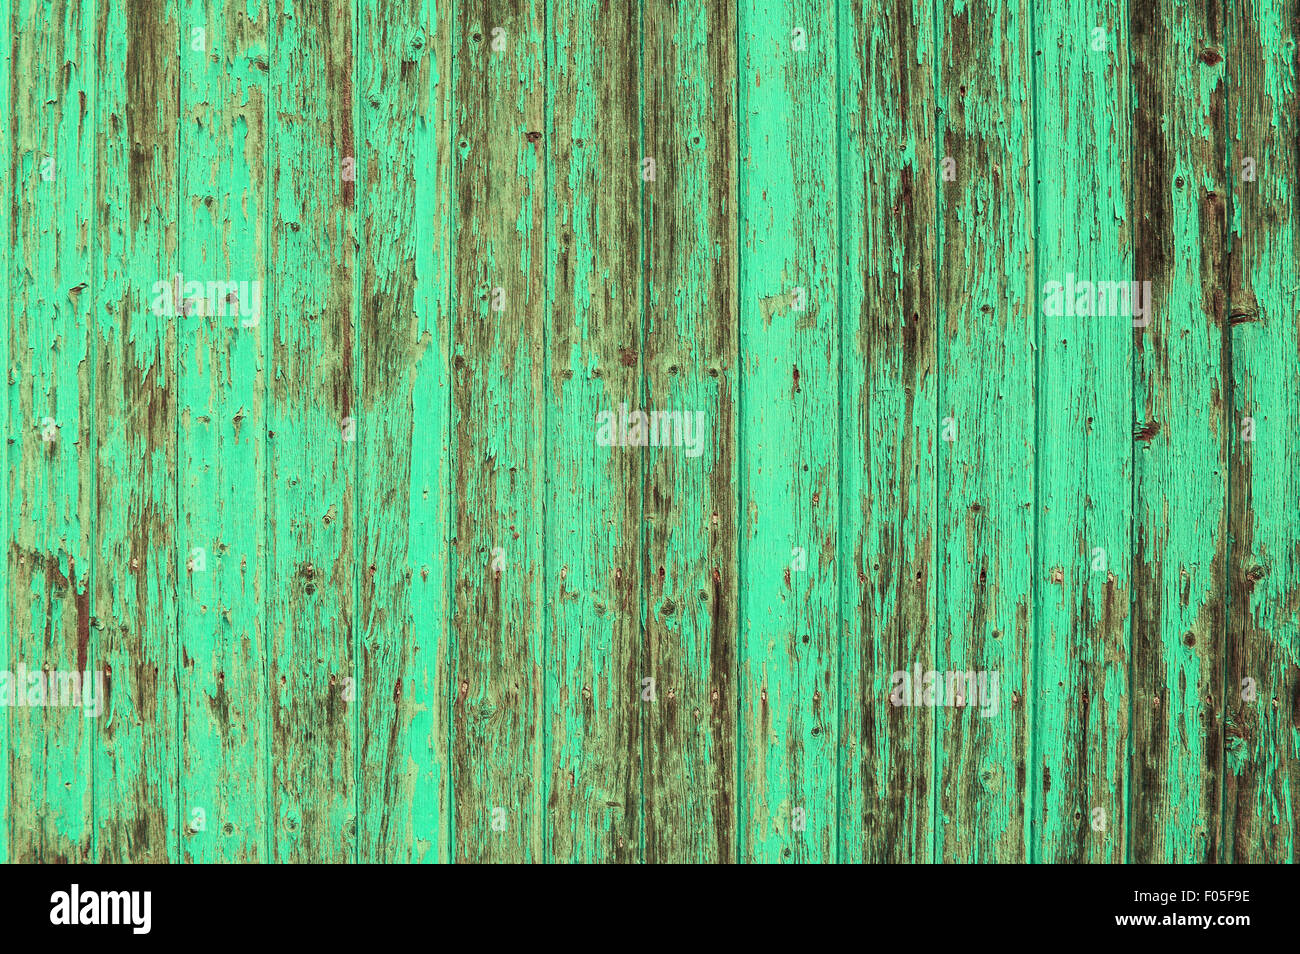 Wooden old turquoise colored background. Blue green shabby chic texture Stock Photo